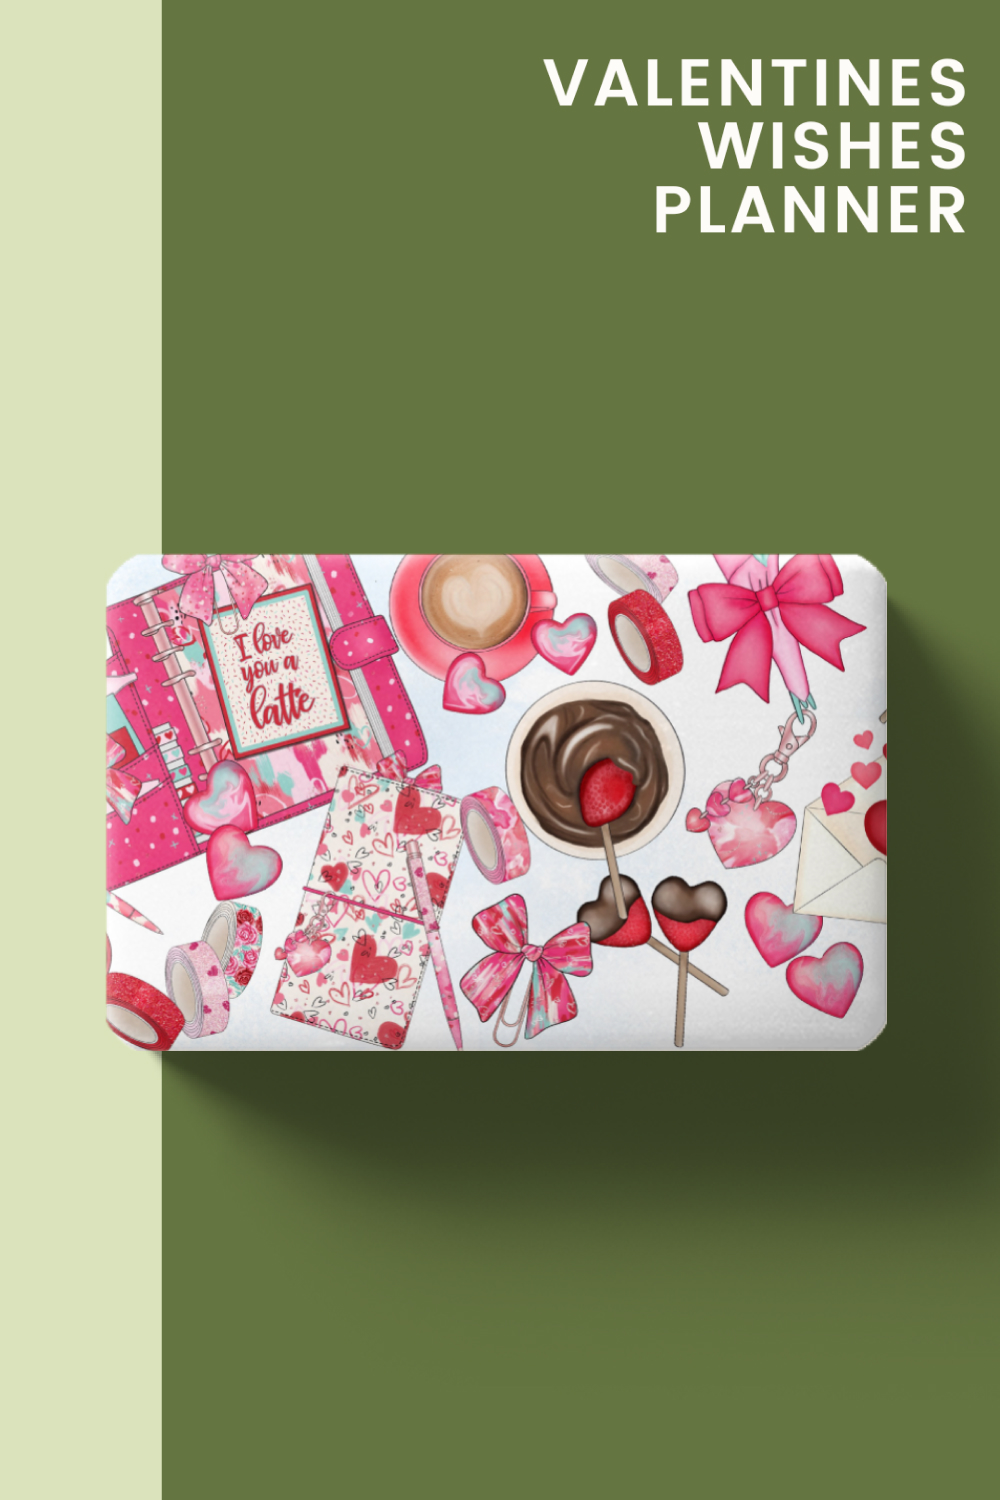 Valentines wishes planner clipart images of pinterest.